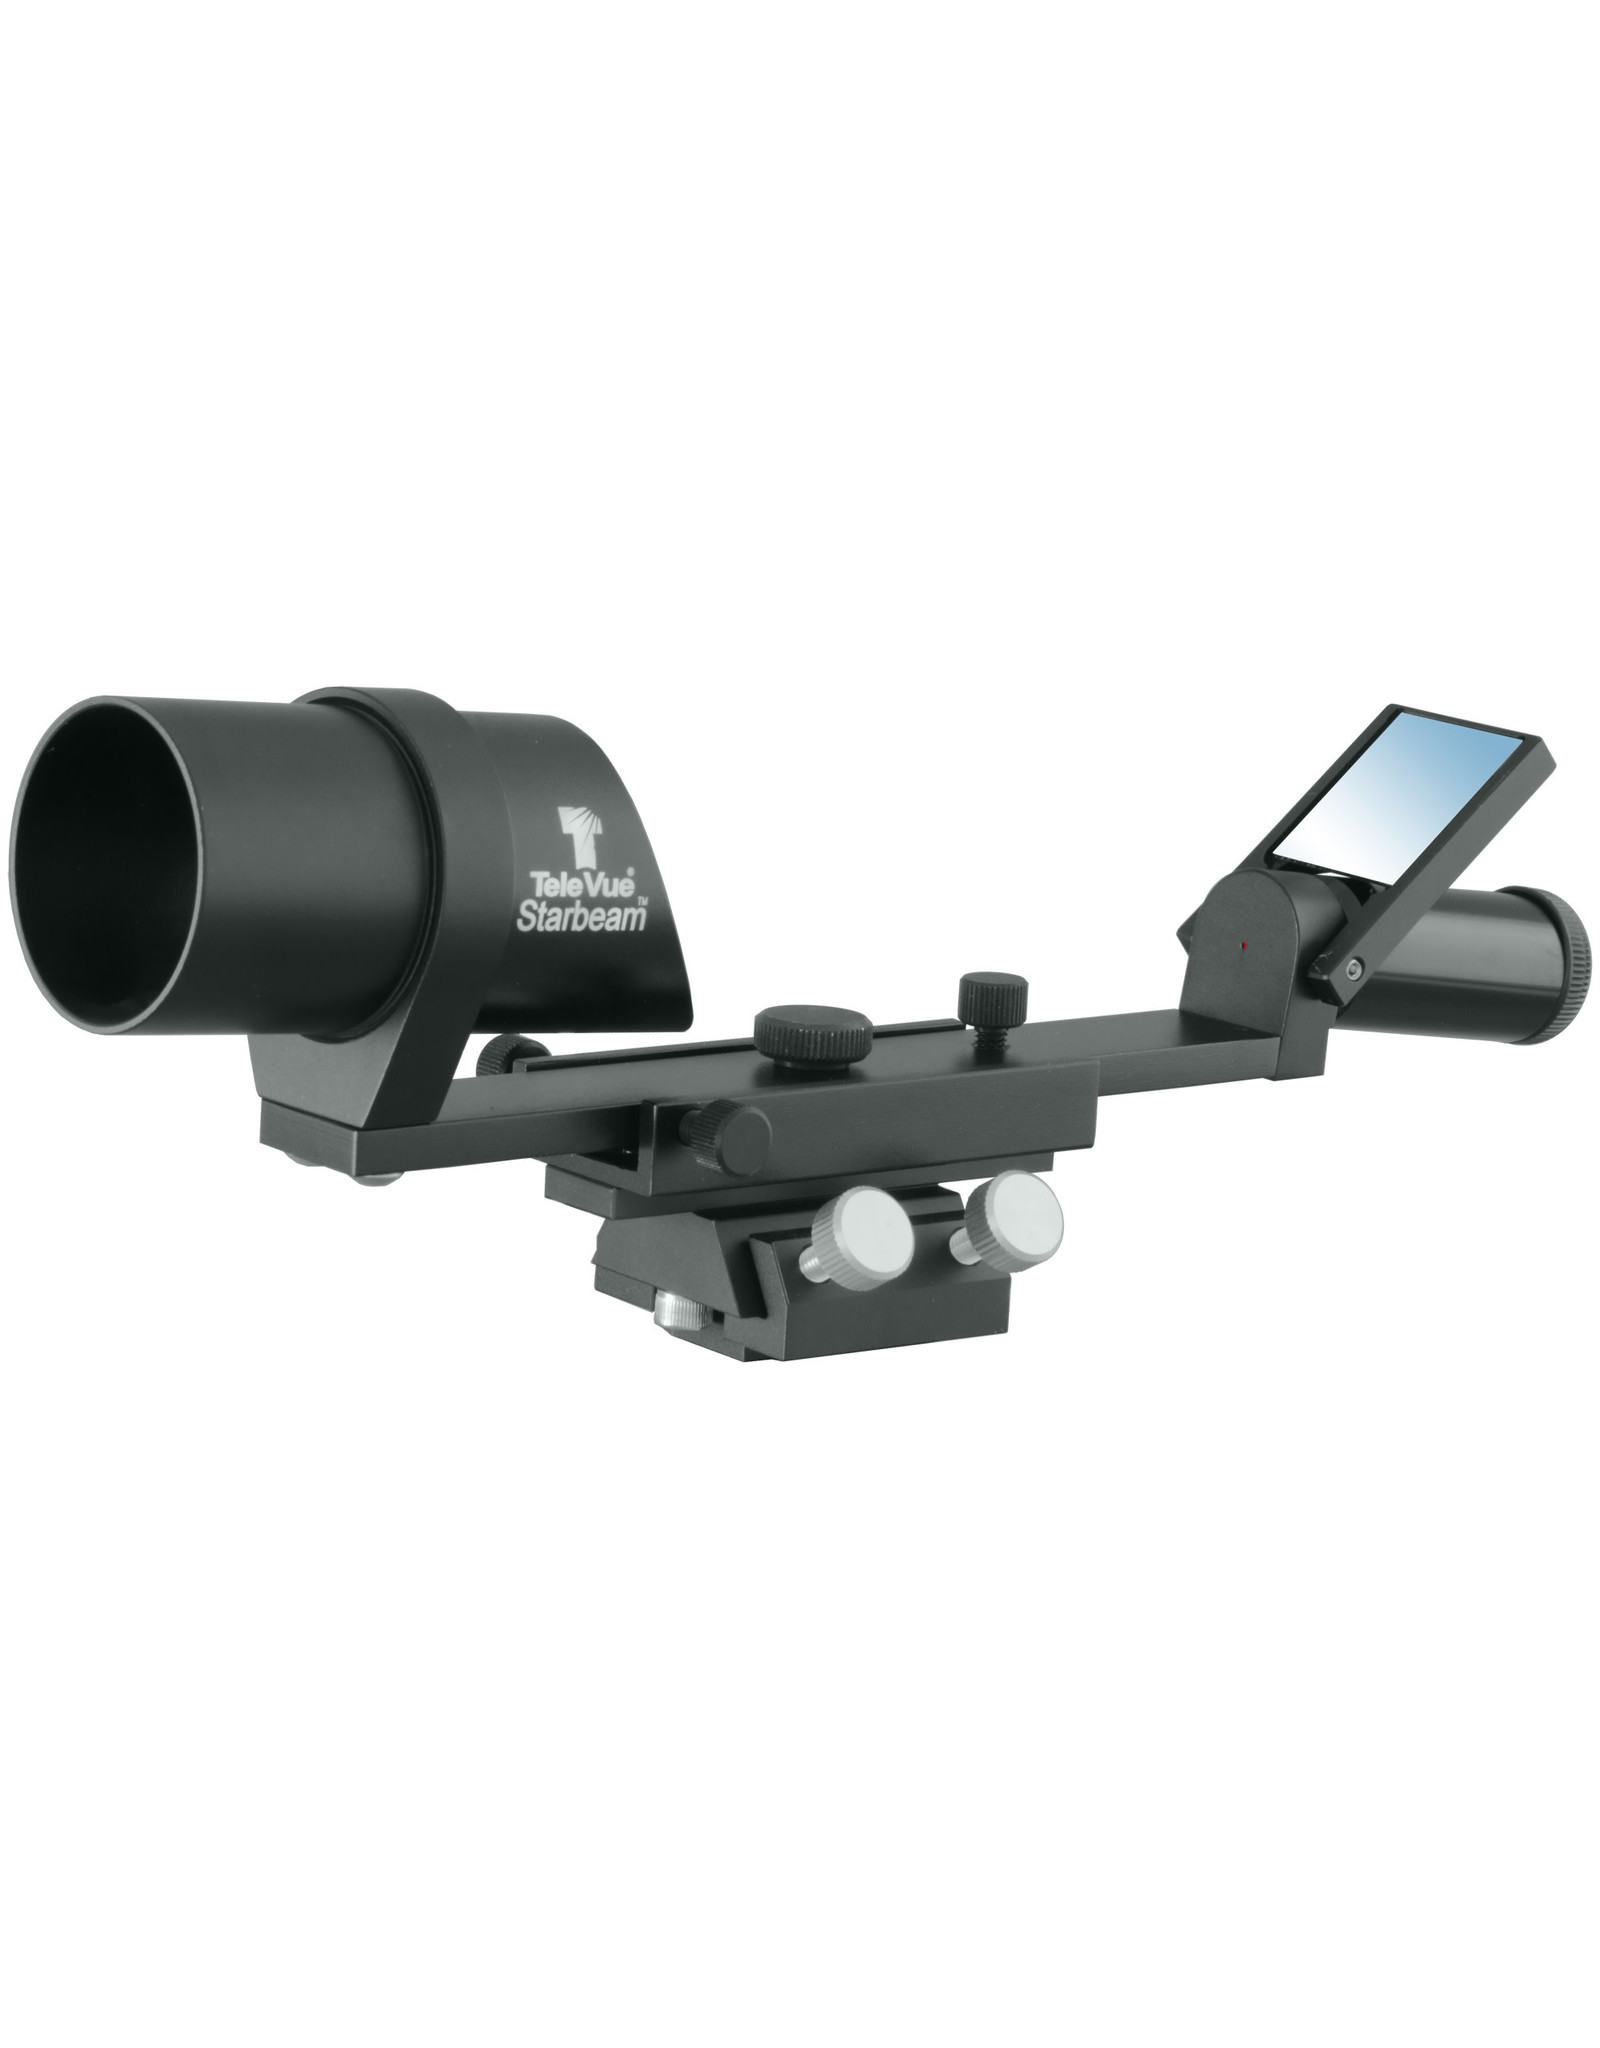 Tele Vue Starbeam with Quick Release base for Tele Vue scopes (SRT-2010)